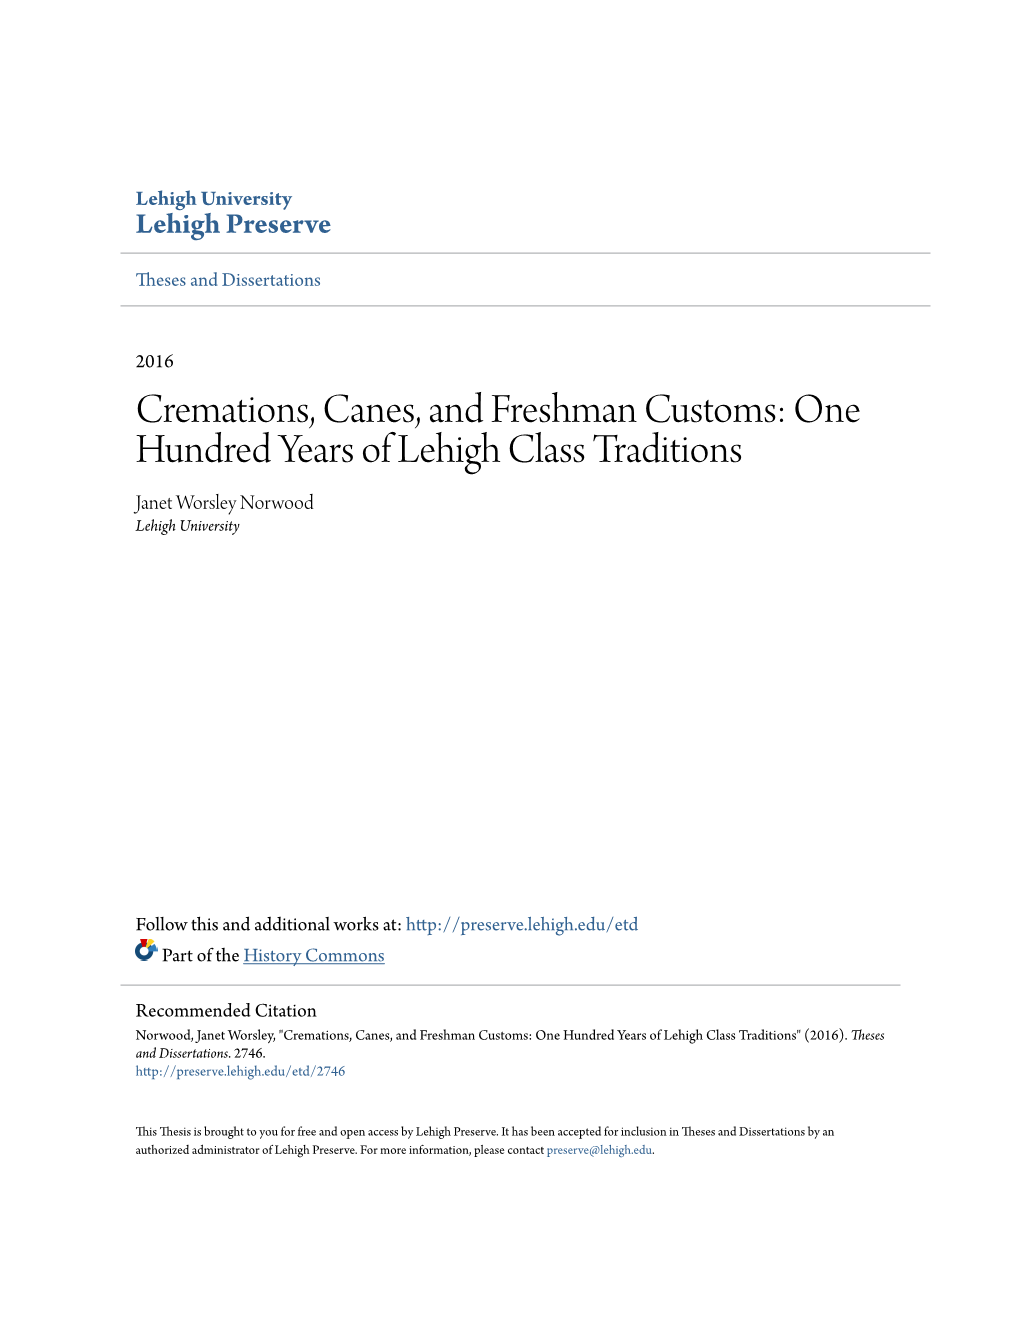 Cremations, Canes, and Freshman Customs: One Hundred Years of Lehigh Class Traditions Janet Worsley Norwood Lehigh University